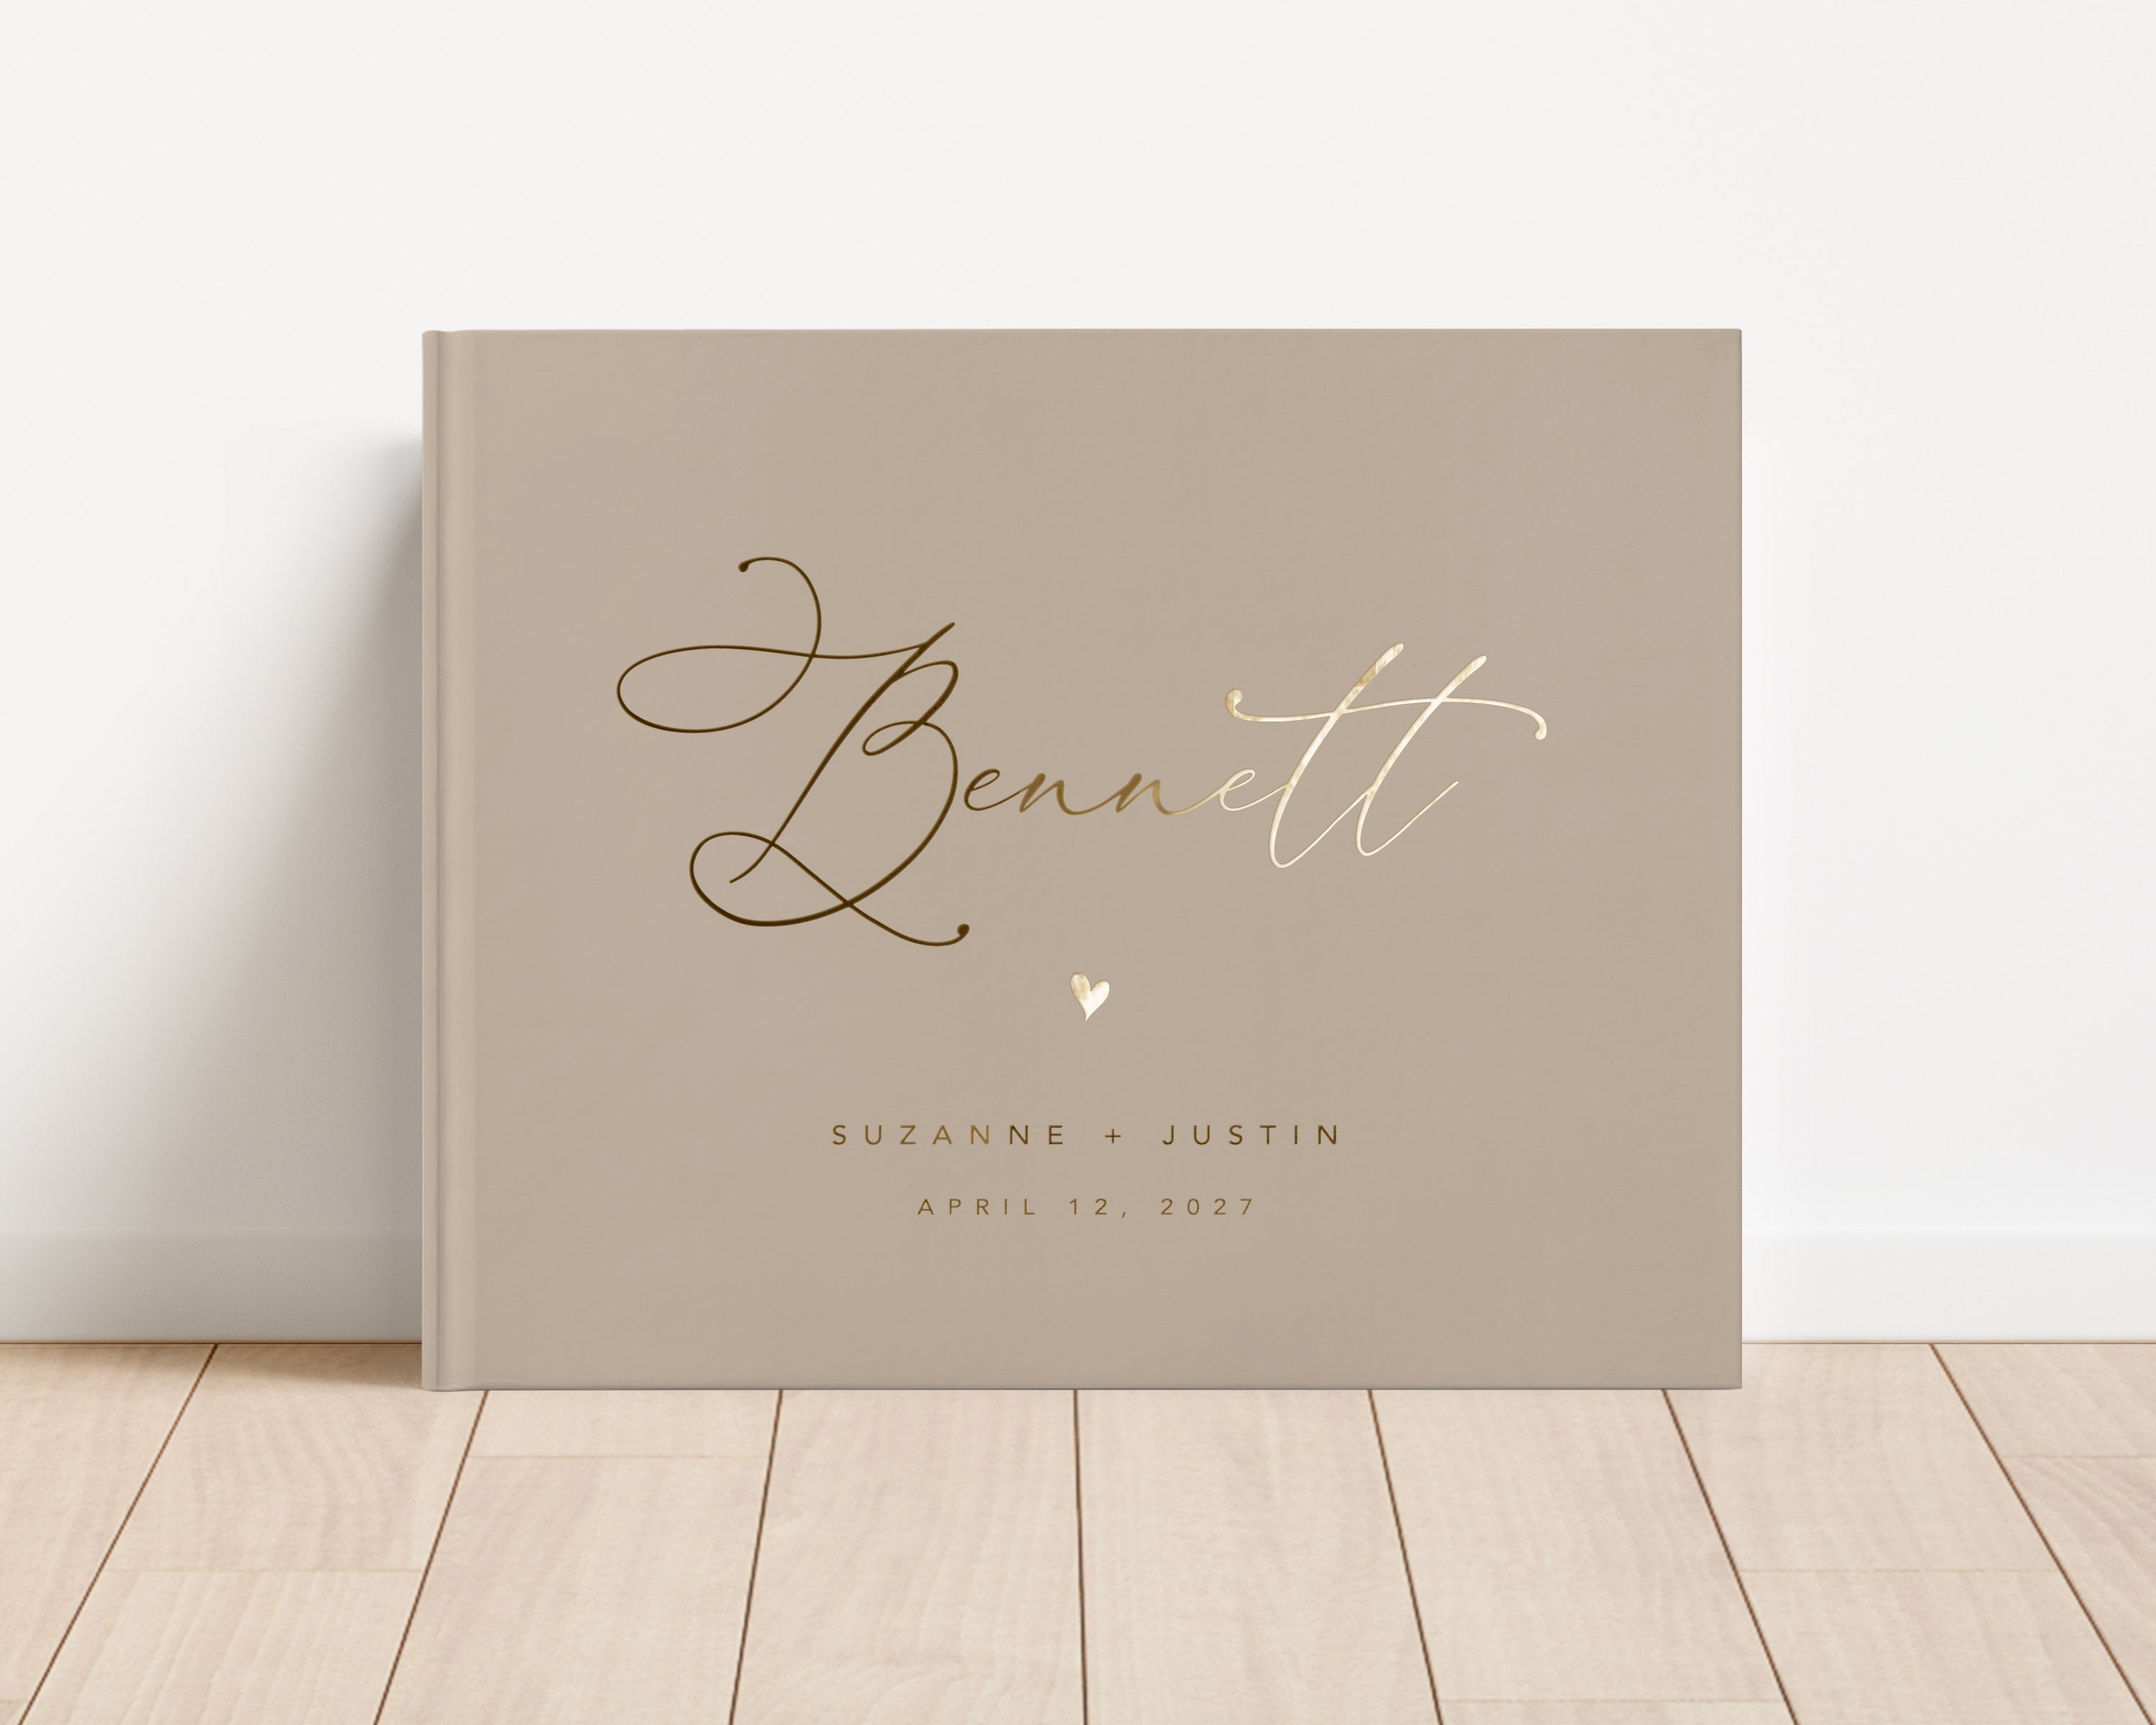 Custom hardback wedding guest book personalized with luxury gold foil text.